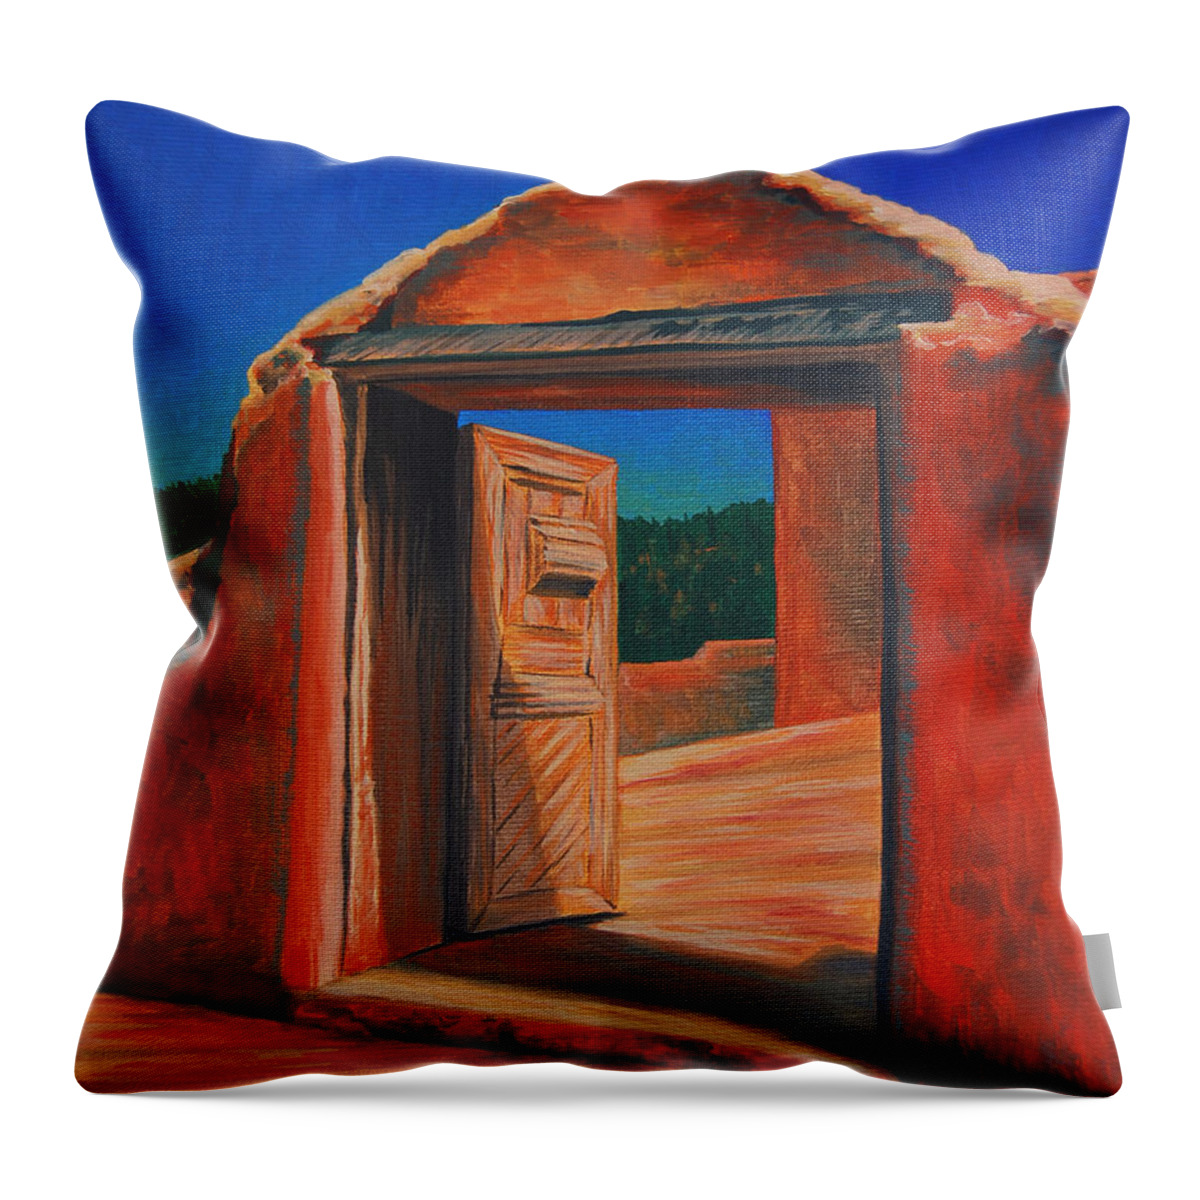 Southwest Throw Pillow featuring the painting Doorway To Las Trampas by Cheryl Fecht